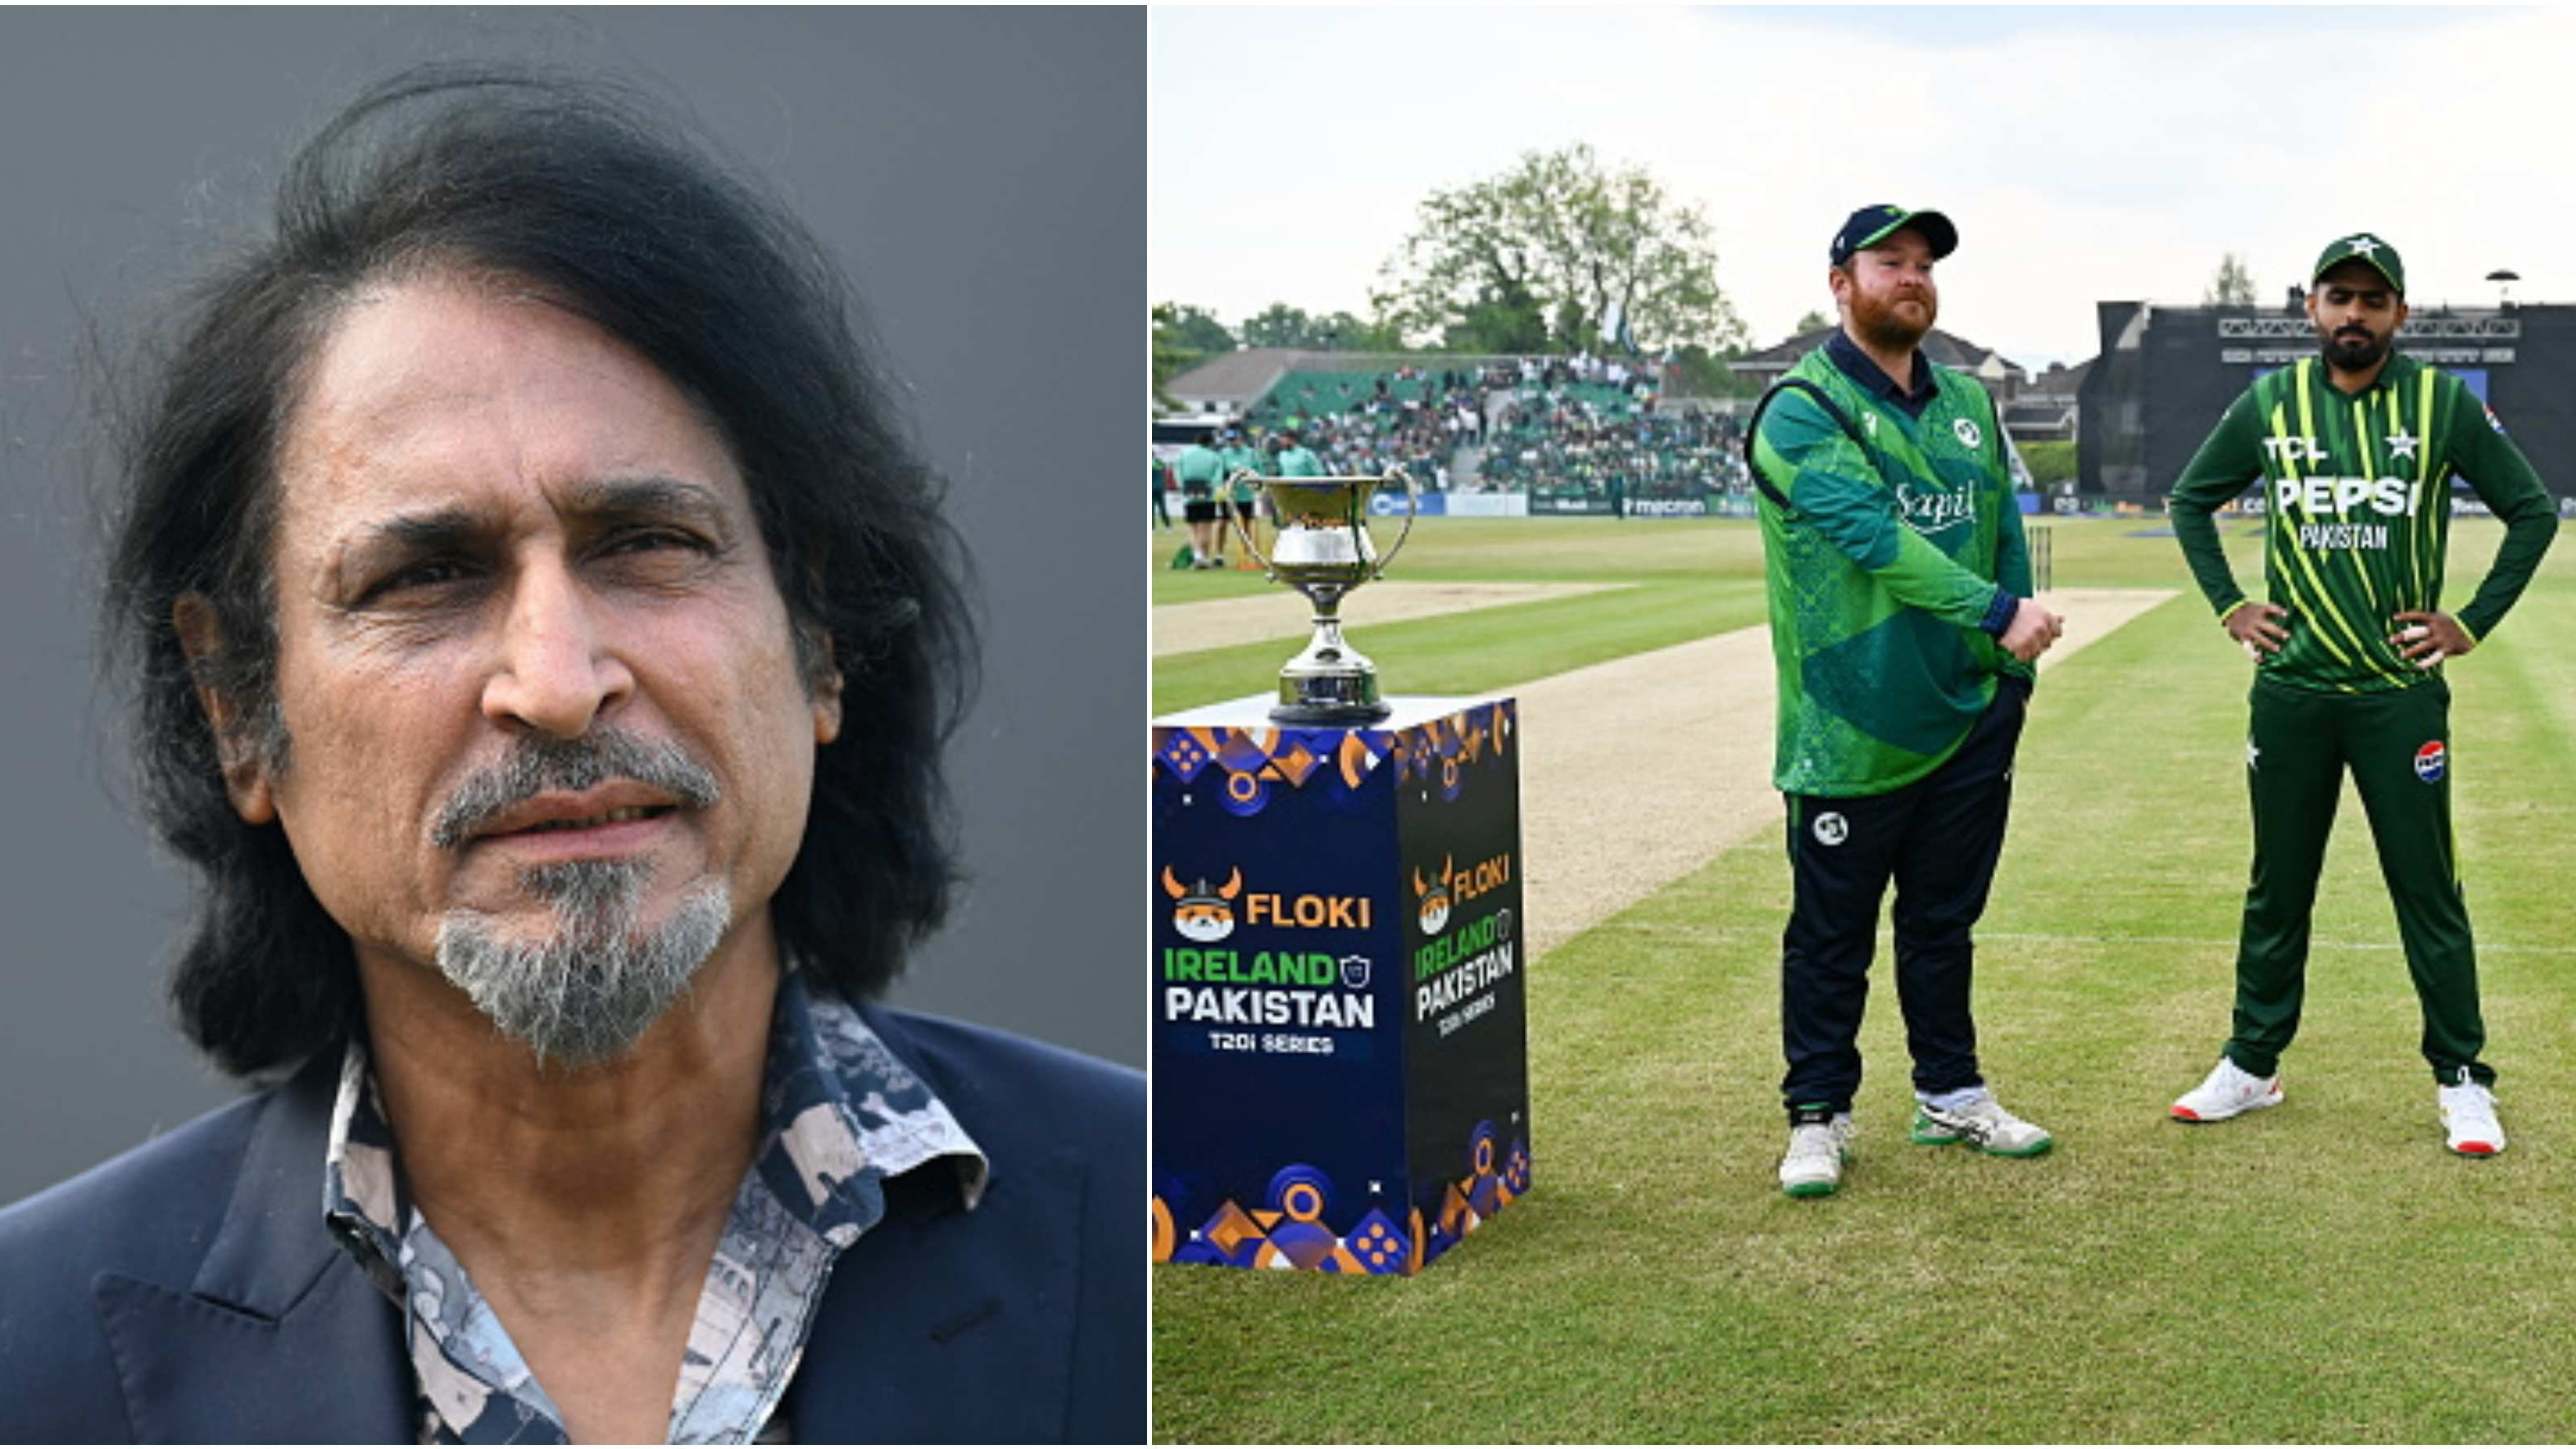 “It feels like a club game is being telecast”: Ramiz Raja pained by ordinary coverage of Ireland-Pakistan T20I series